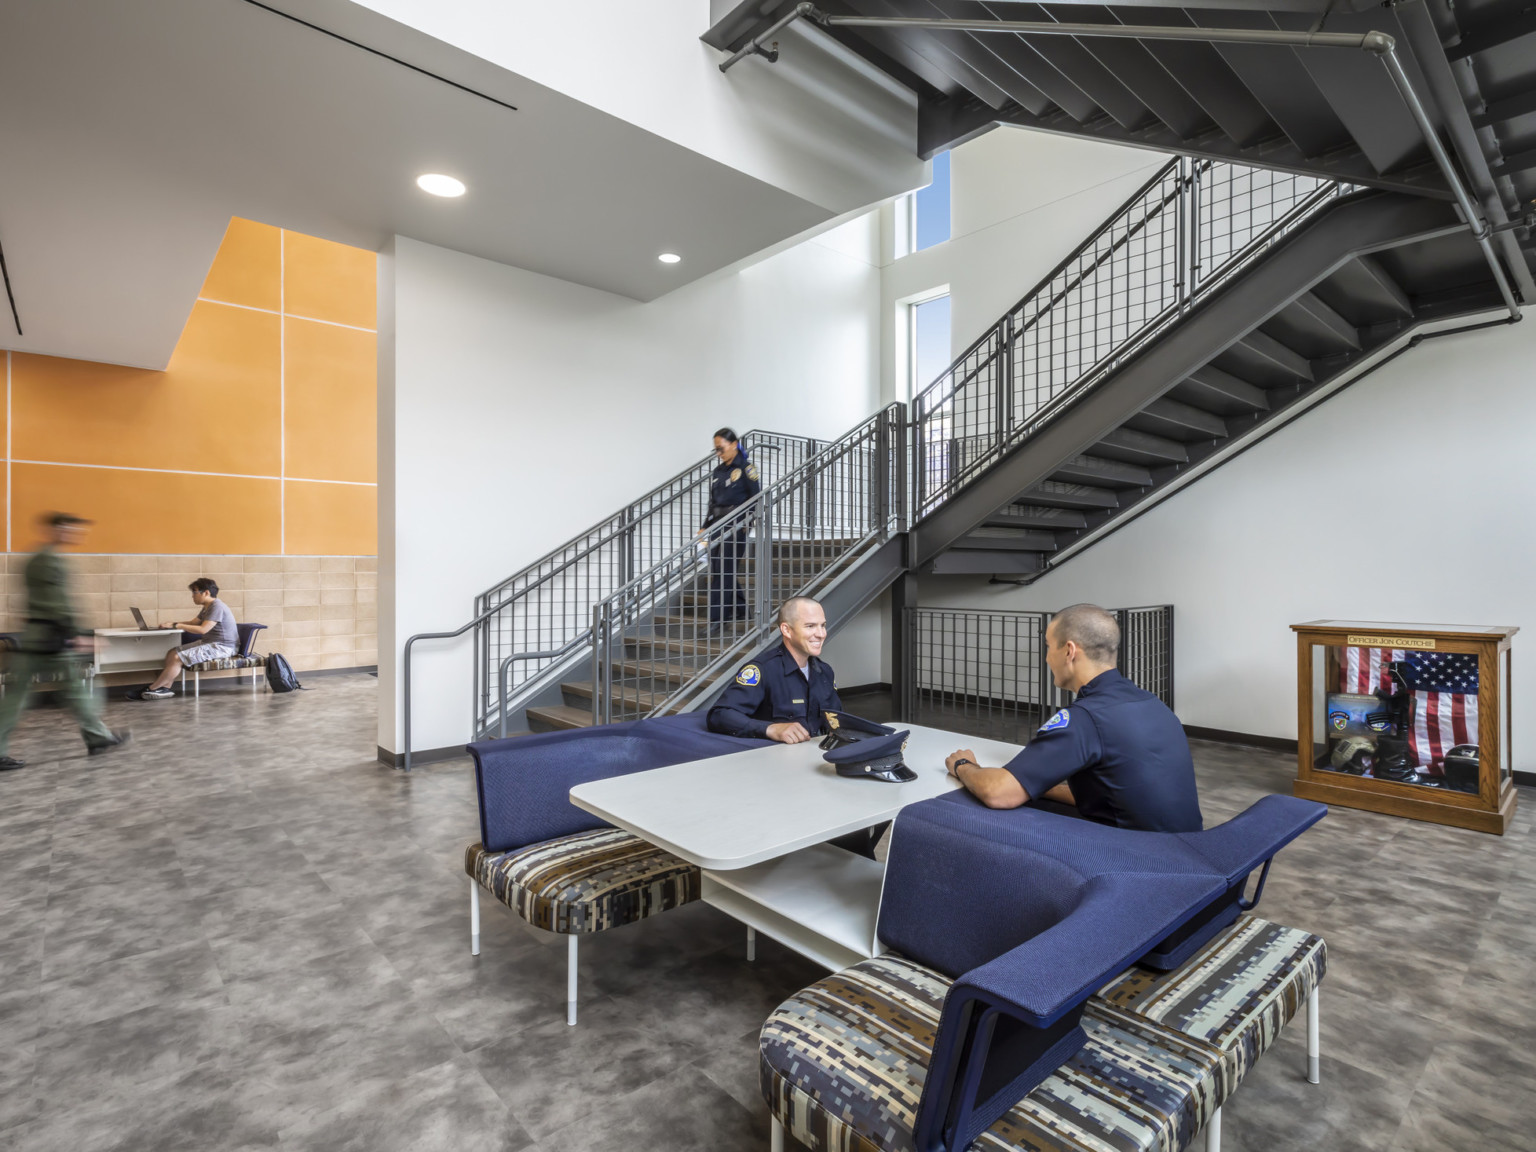 Two officers sit at a 4 person table with individual spaces at the base of a stairwell